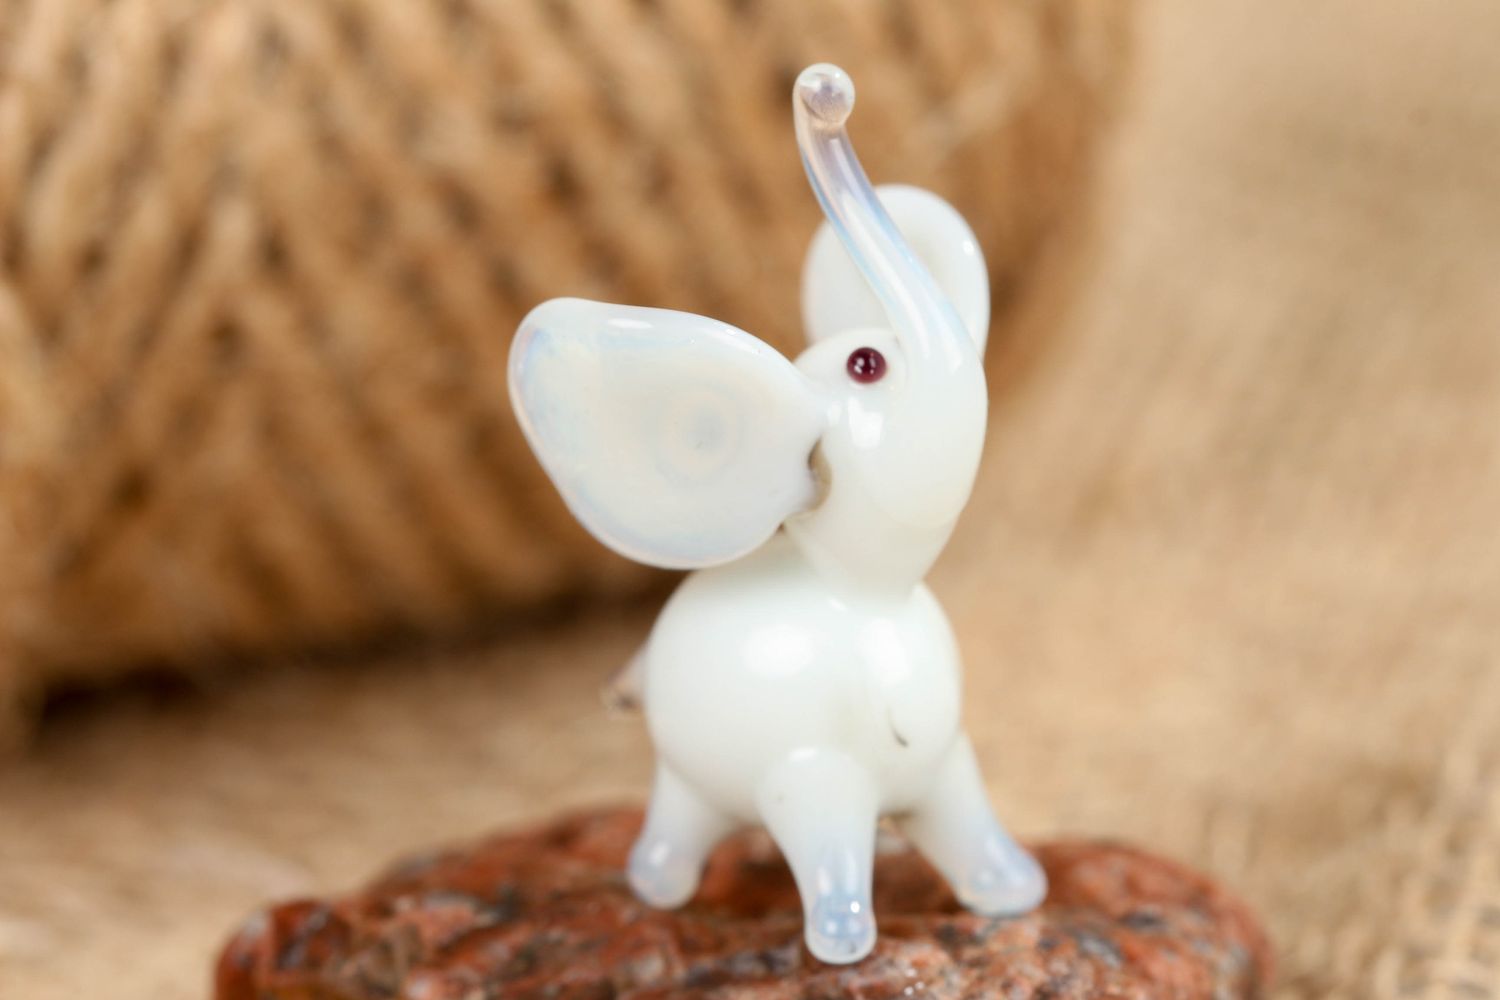 Collectible glass statuette of white elephant photo 4